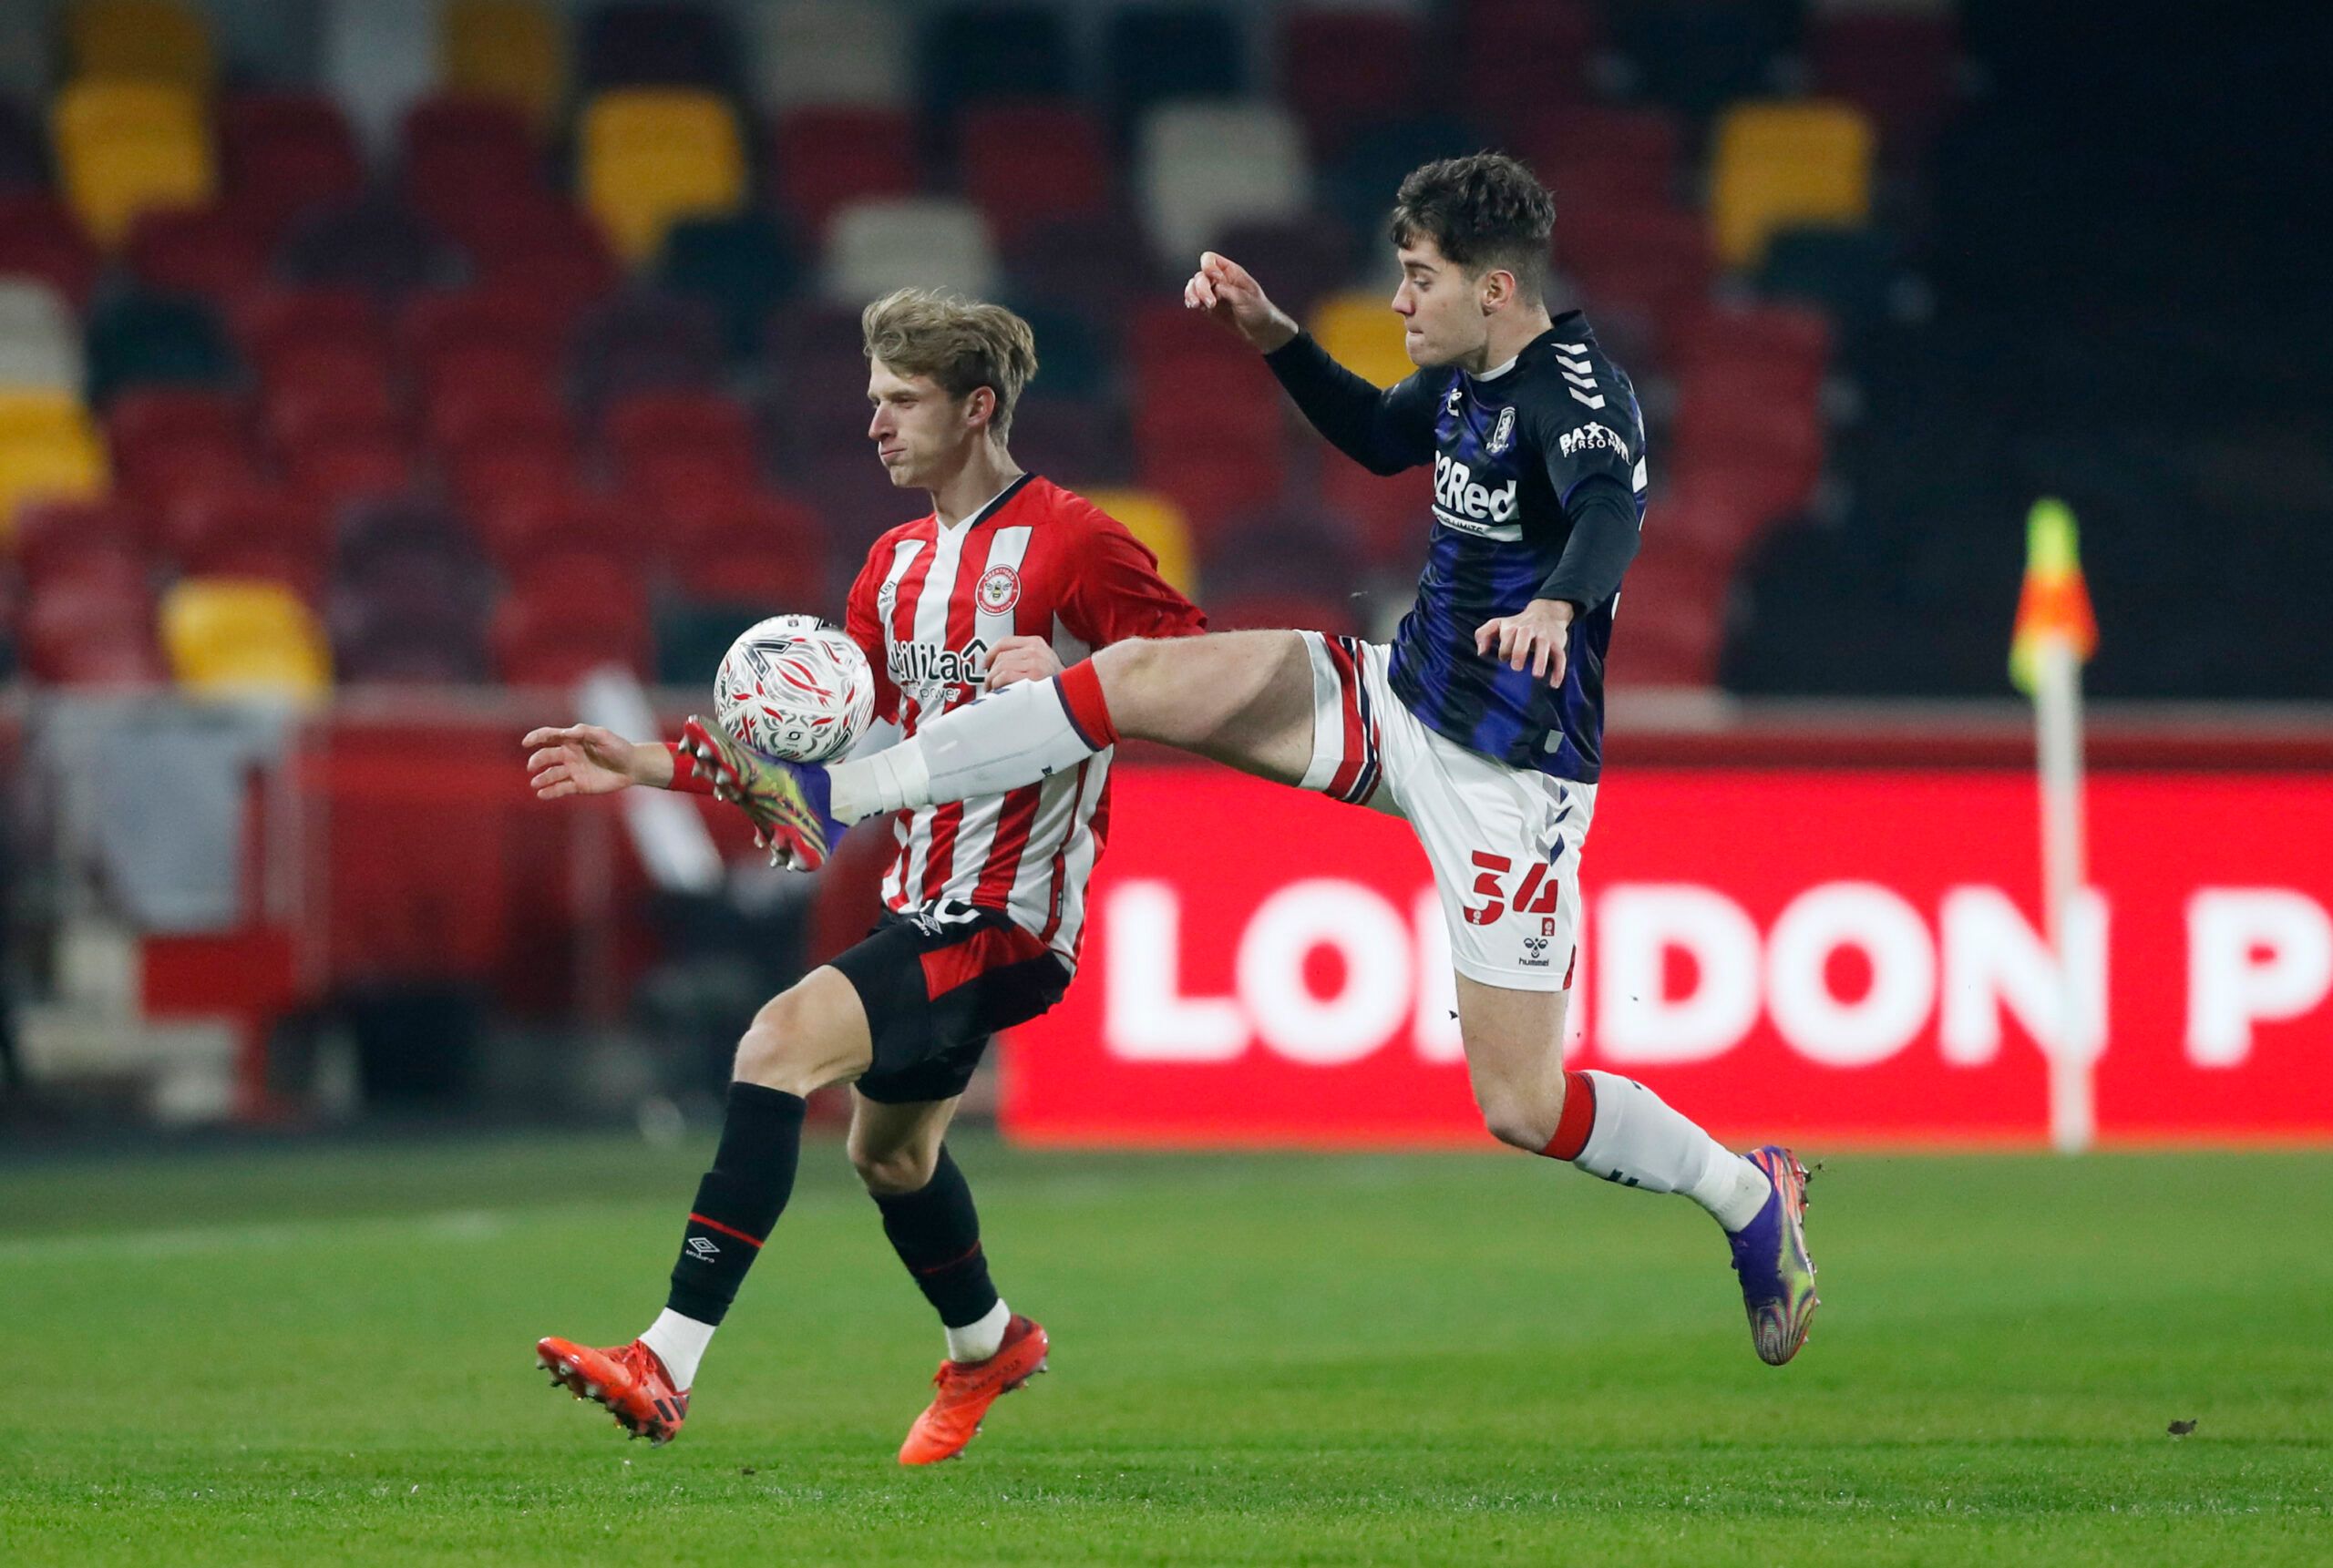 Soccer Football - FA Cup - Third Round - Brentford v Middlesbrough - Brentford Community Stadium, London, Britain - January 9, 2021  Brentford's Mads Roerslev in action with Middlesbrough's Hayden Hackney Action Images via Reuters/Matthew Childs